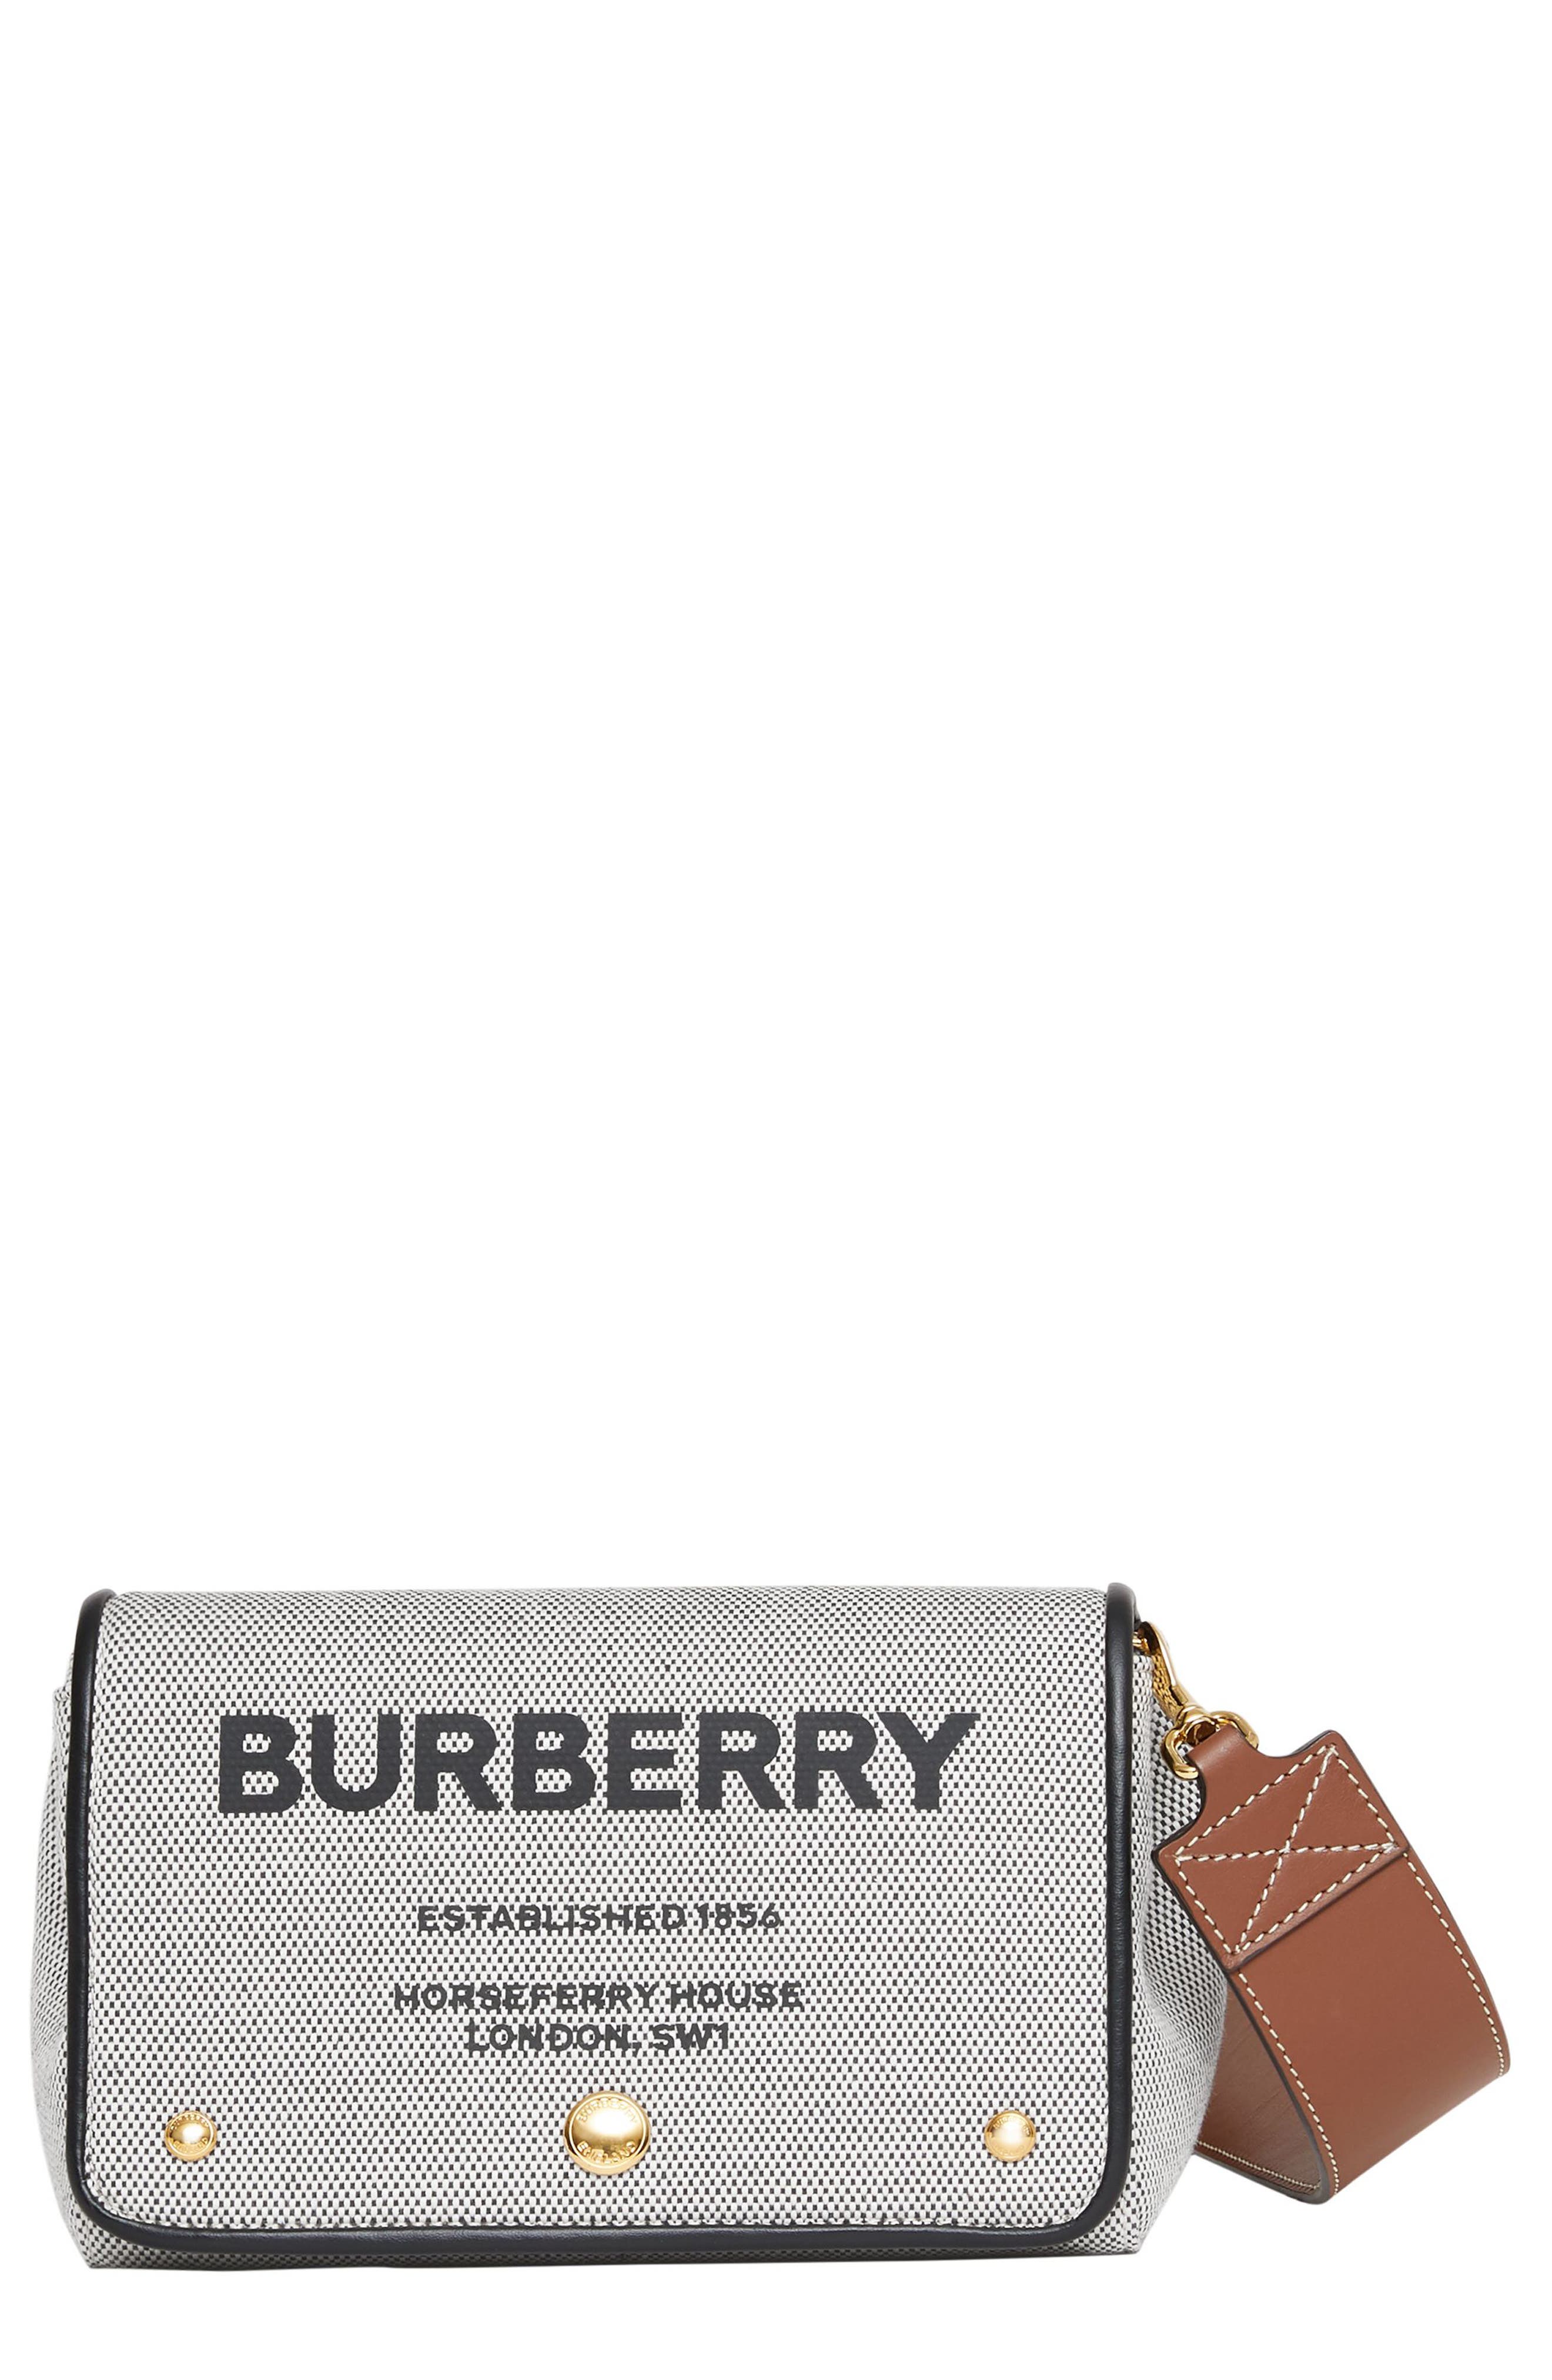 Burberry Hackberry Horseferry Print Canvas Crossbody Bag in Black/Tan at Nordstrom